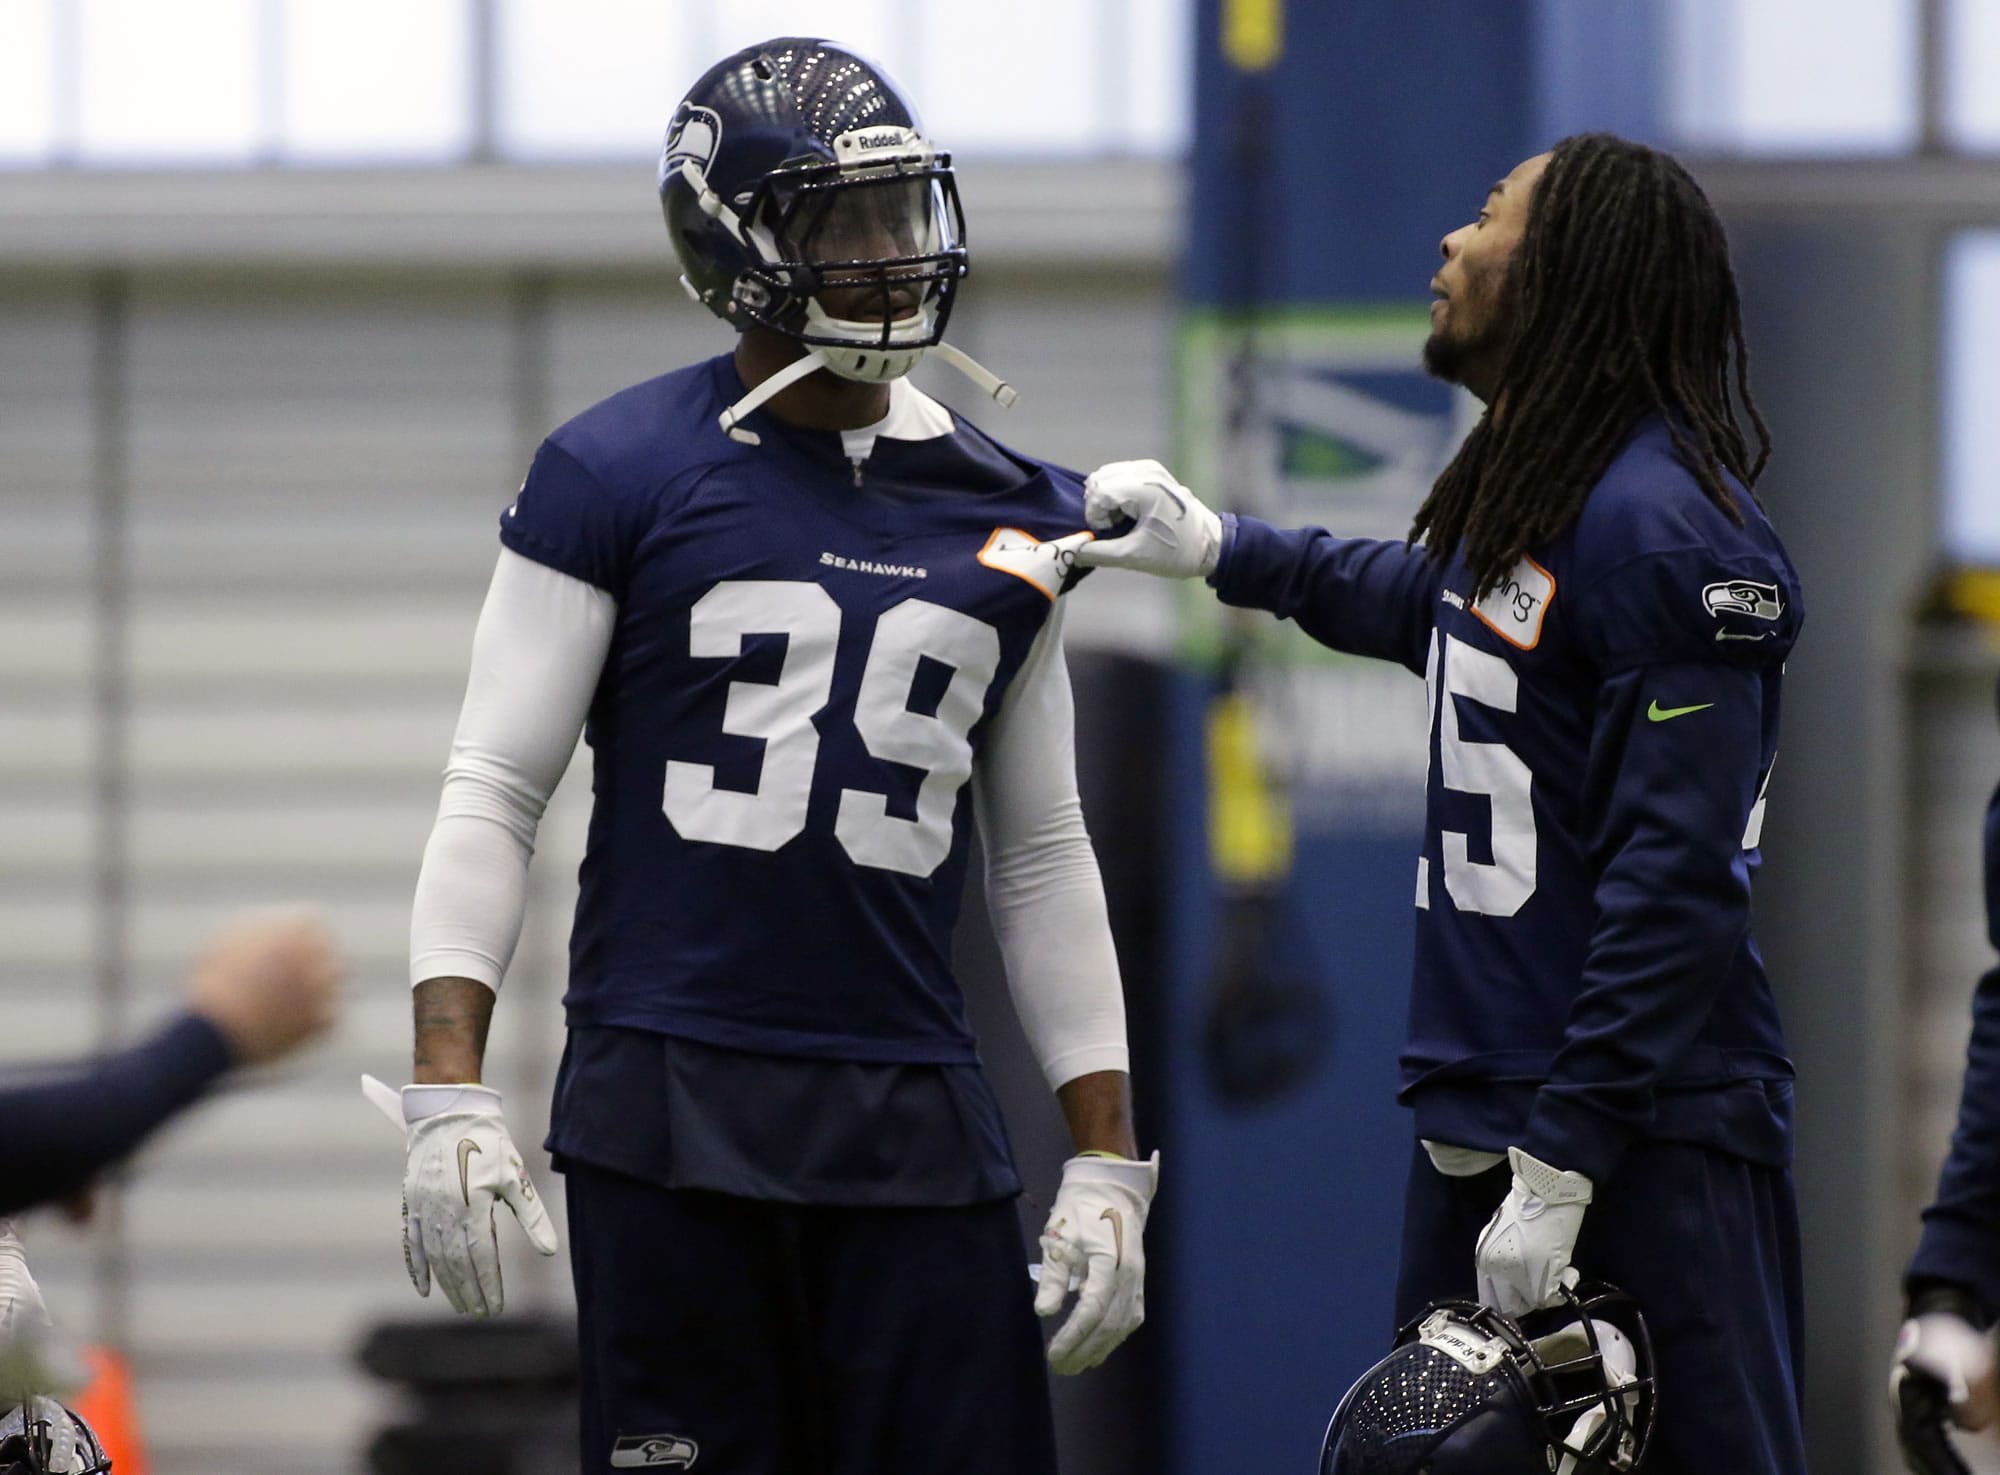 Seattle Seahawks cornerbacks Richard Sherman (25) and Brandon Browner (39) joke around during practice as they prepare to face the Falcons on Sunday.